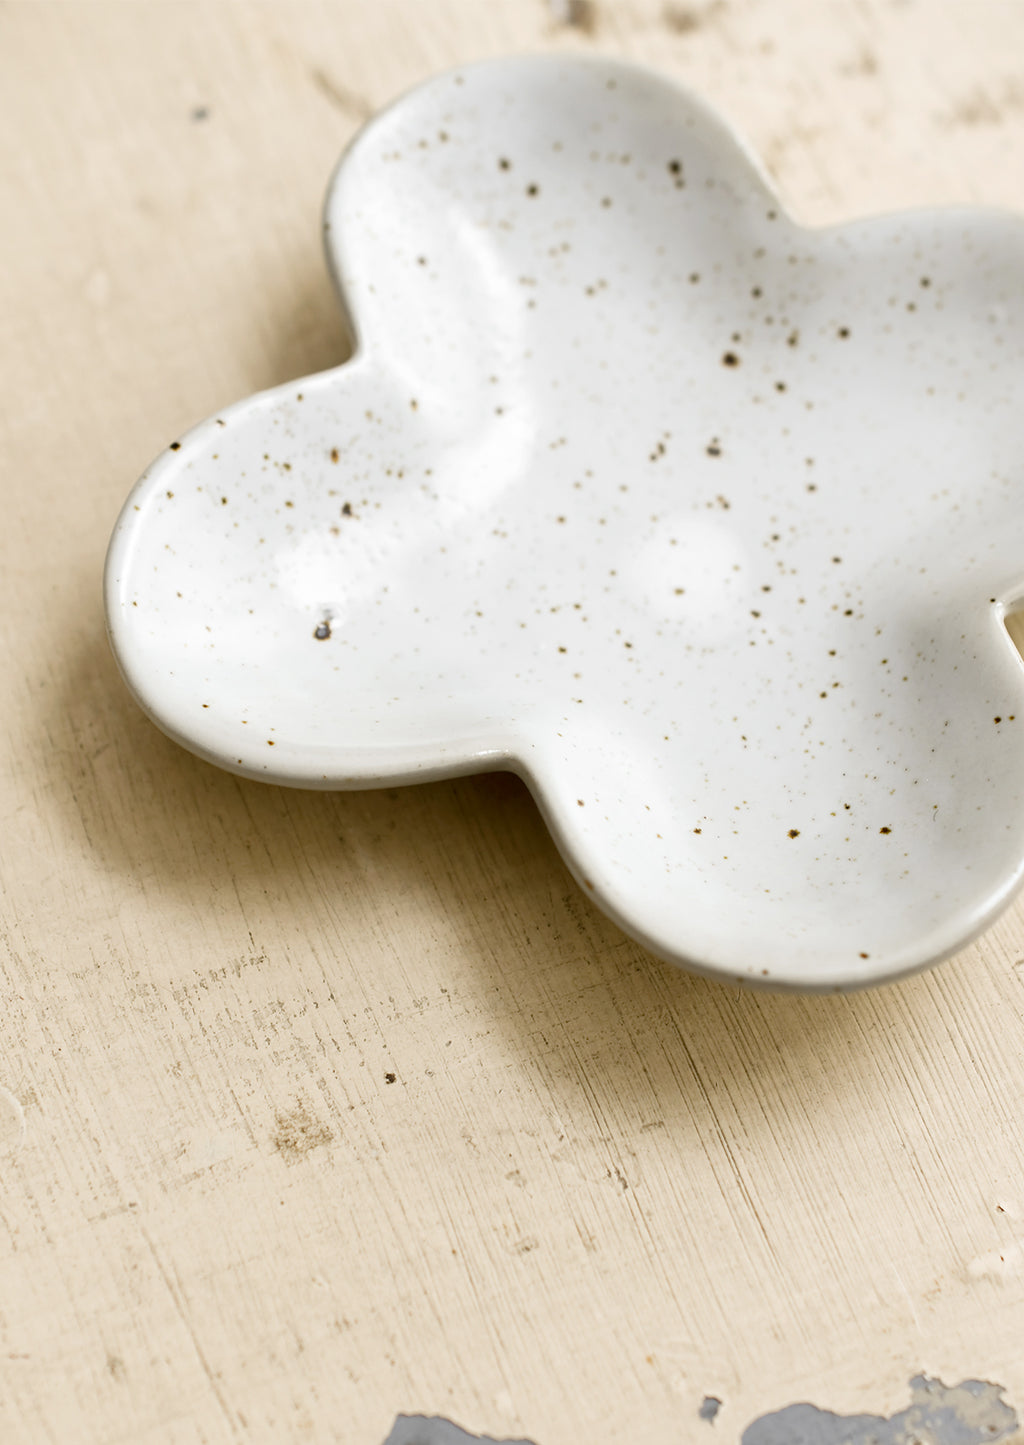 3: A clover shaped little dish in speckled white ceramic.